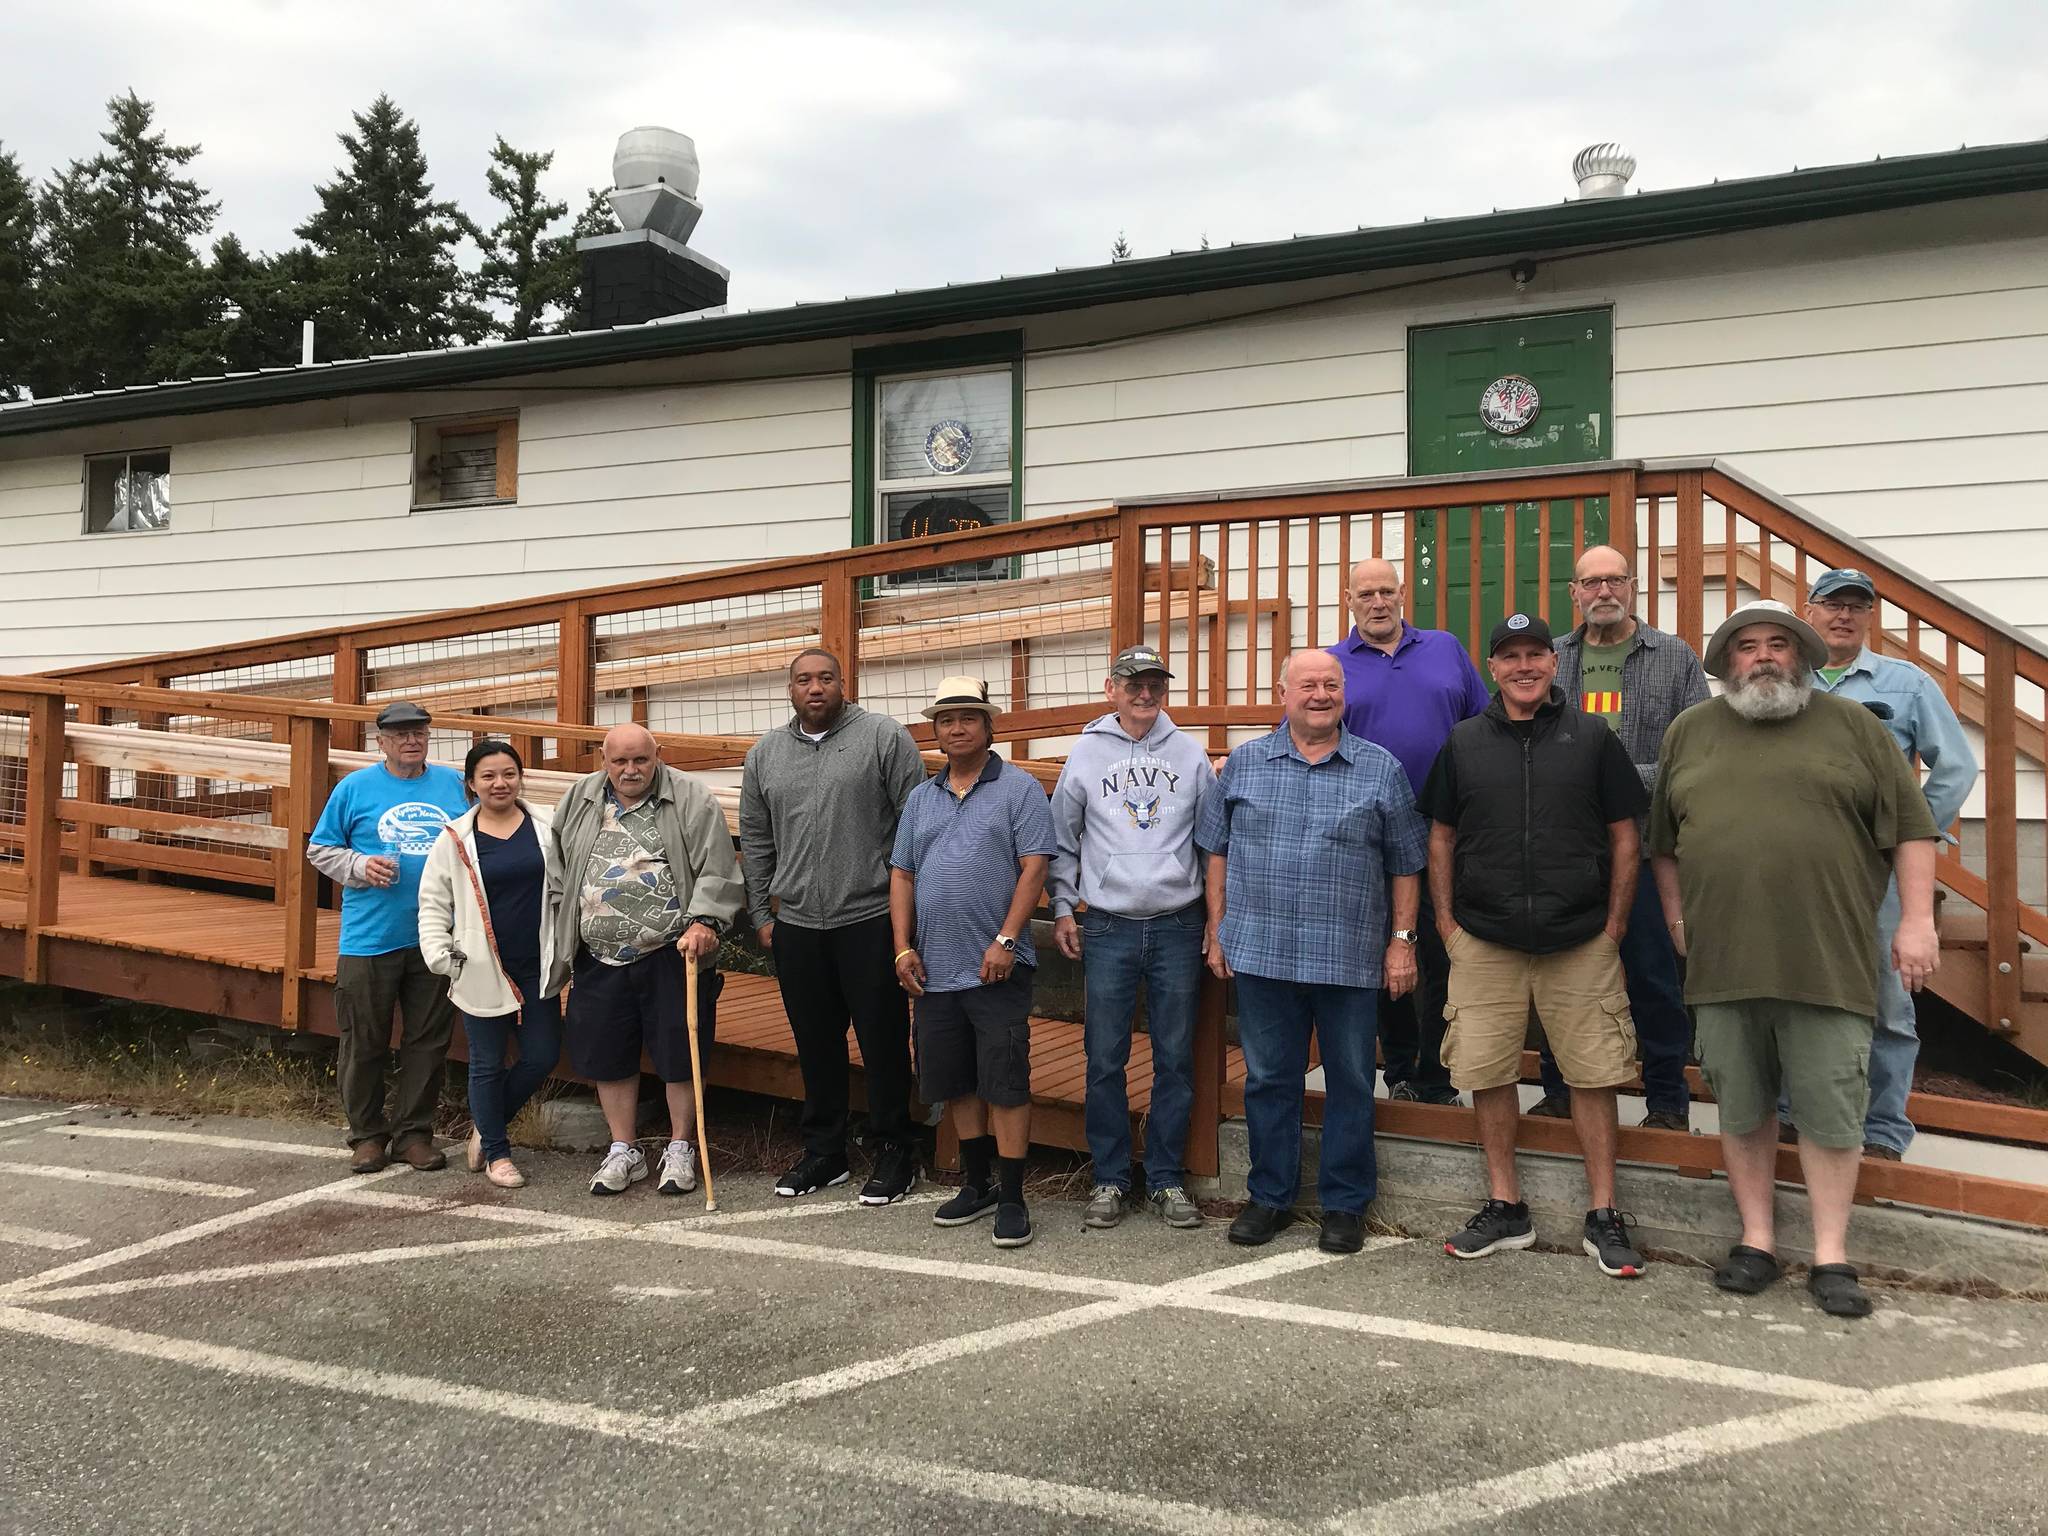 Photo provided by John Callahan
Disabled American Veterans built a ramp to make its Oak Harbor location more wheelchair-accessible. Construction was completed this summer.